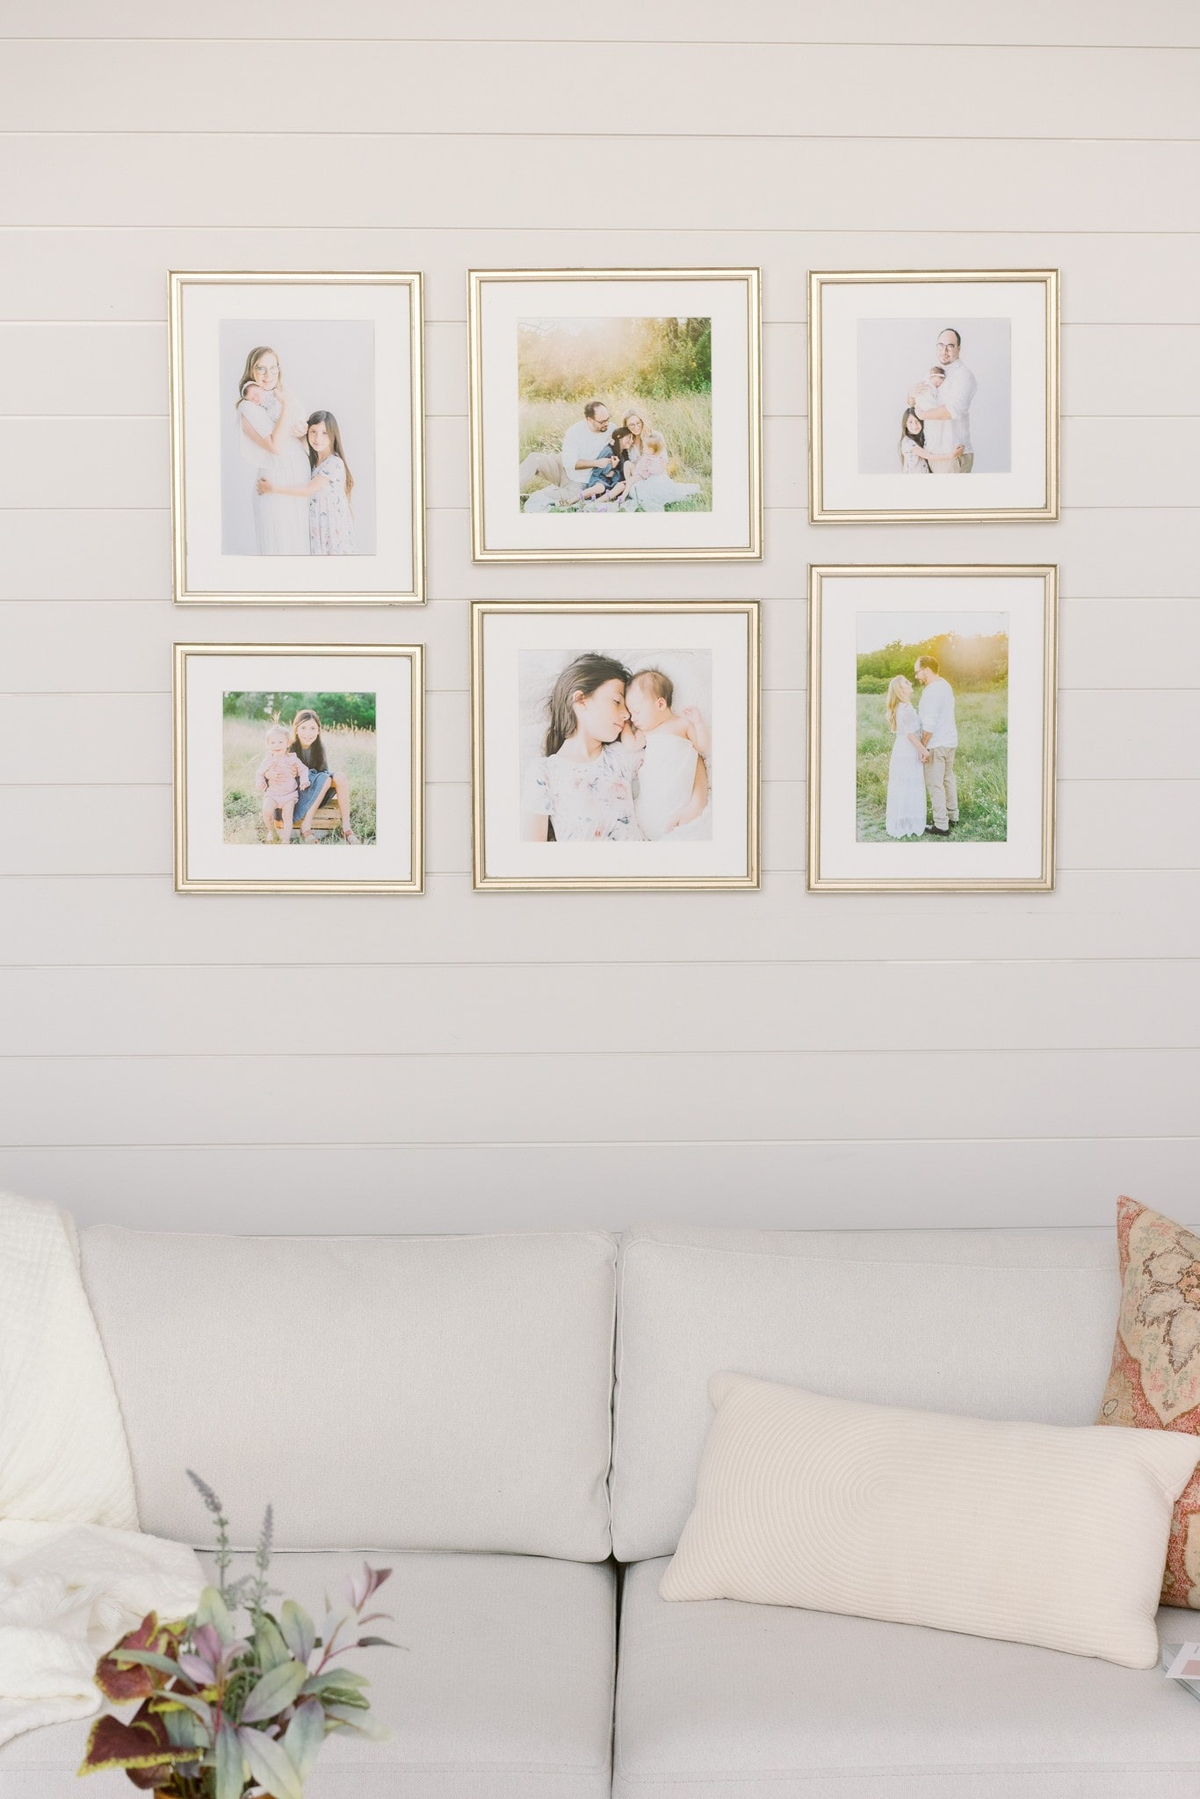 Stunning gallery wall design with gold frames and white mat by Sana Ahmed Photography.